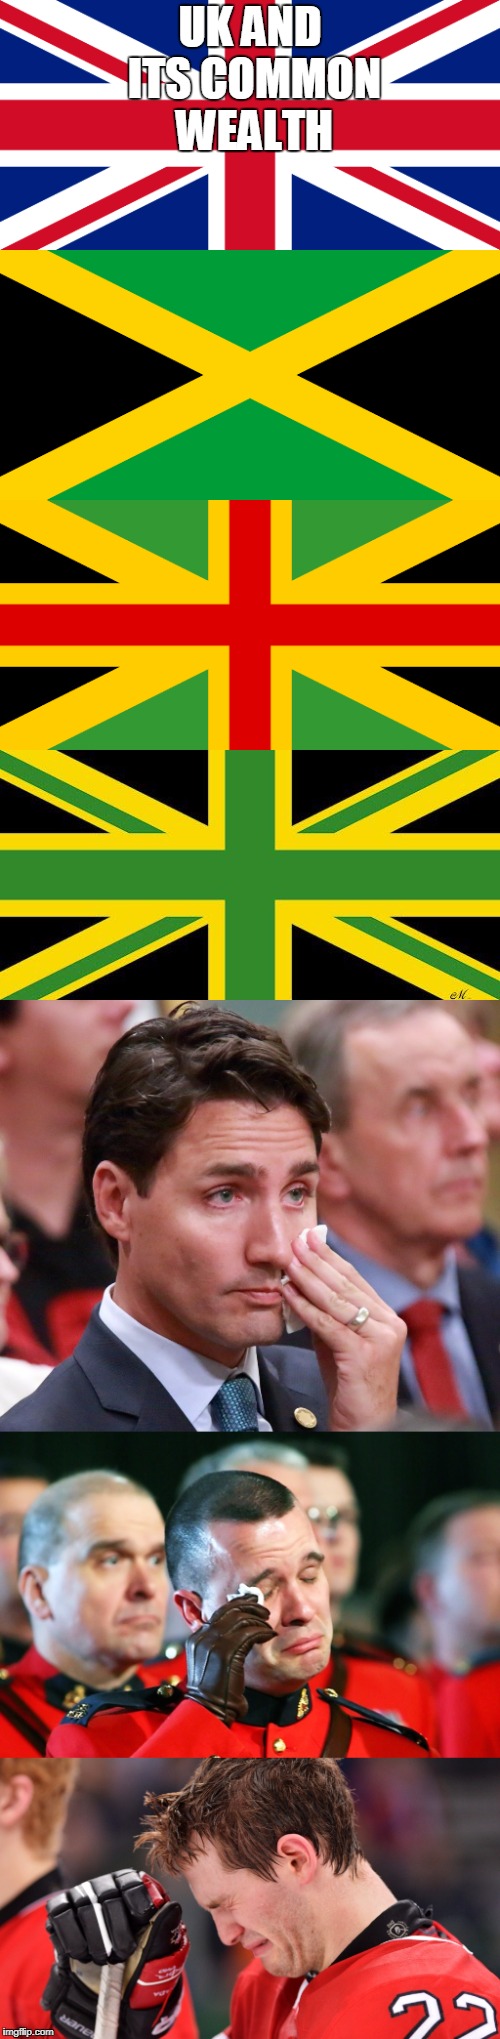 It is how it is @ Canada | UK AND ITS COMMON WEALTH | image tagged in independence day,uk,canada,jamaica | made w/ Imgflip meme maker